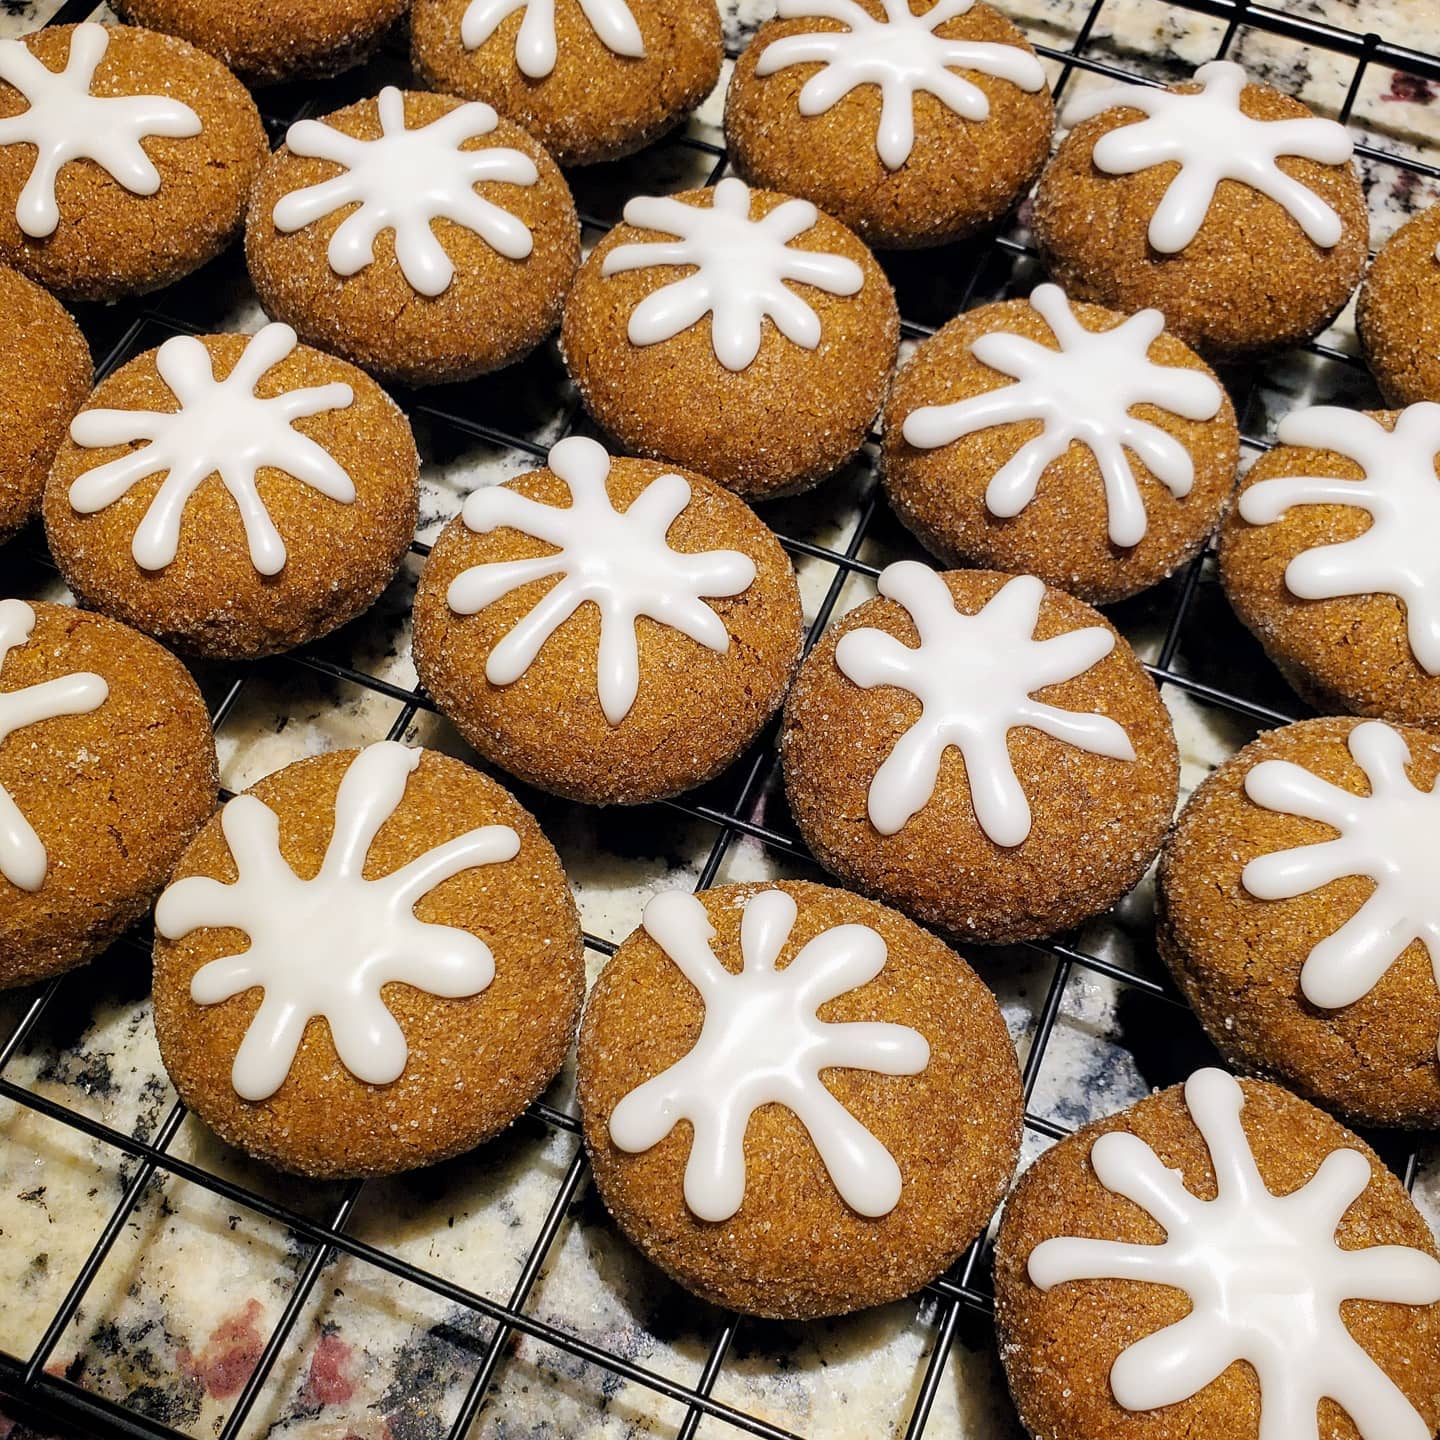 happy holidays! 🎄🎄🎄

these soft and chewy molasses drop cookies are my ultimate fave cookie to make during the winter. they're so warm and cozy, and adorable too!

#thegenzbaker #bakingfromscratch #molassescookies #cookies #homemadeholidays #thefeedfeed #cookiesofinstagram #undiscoveredbaker #thebakefeed #bakingblog #teenbakersofinstagram #teenbaker